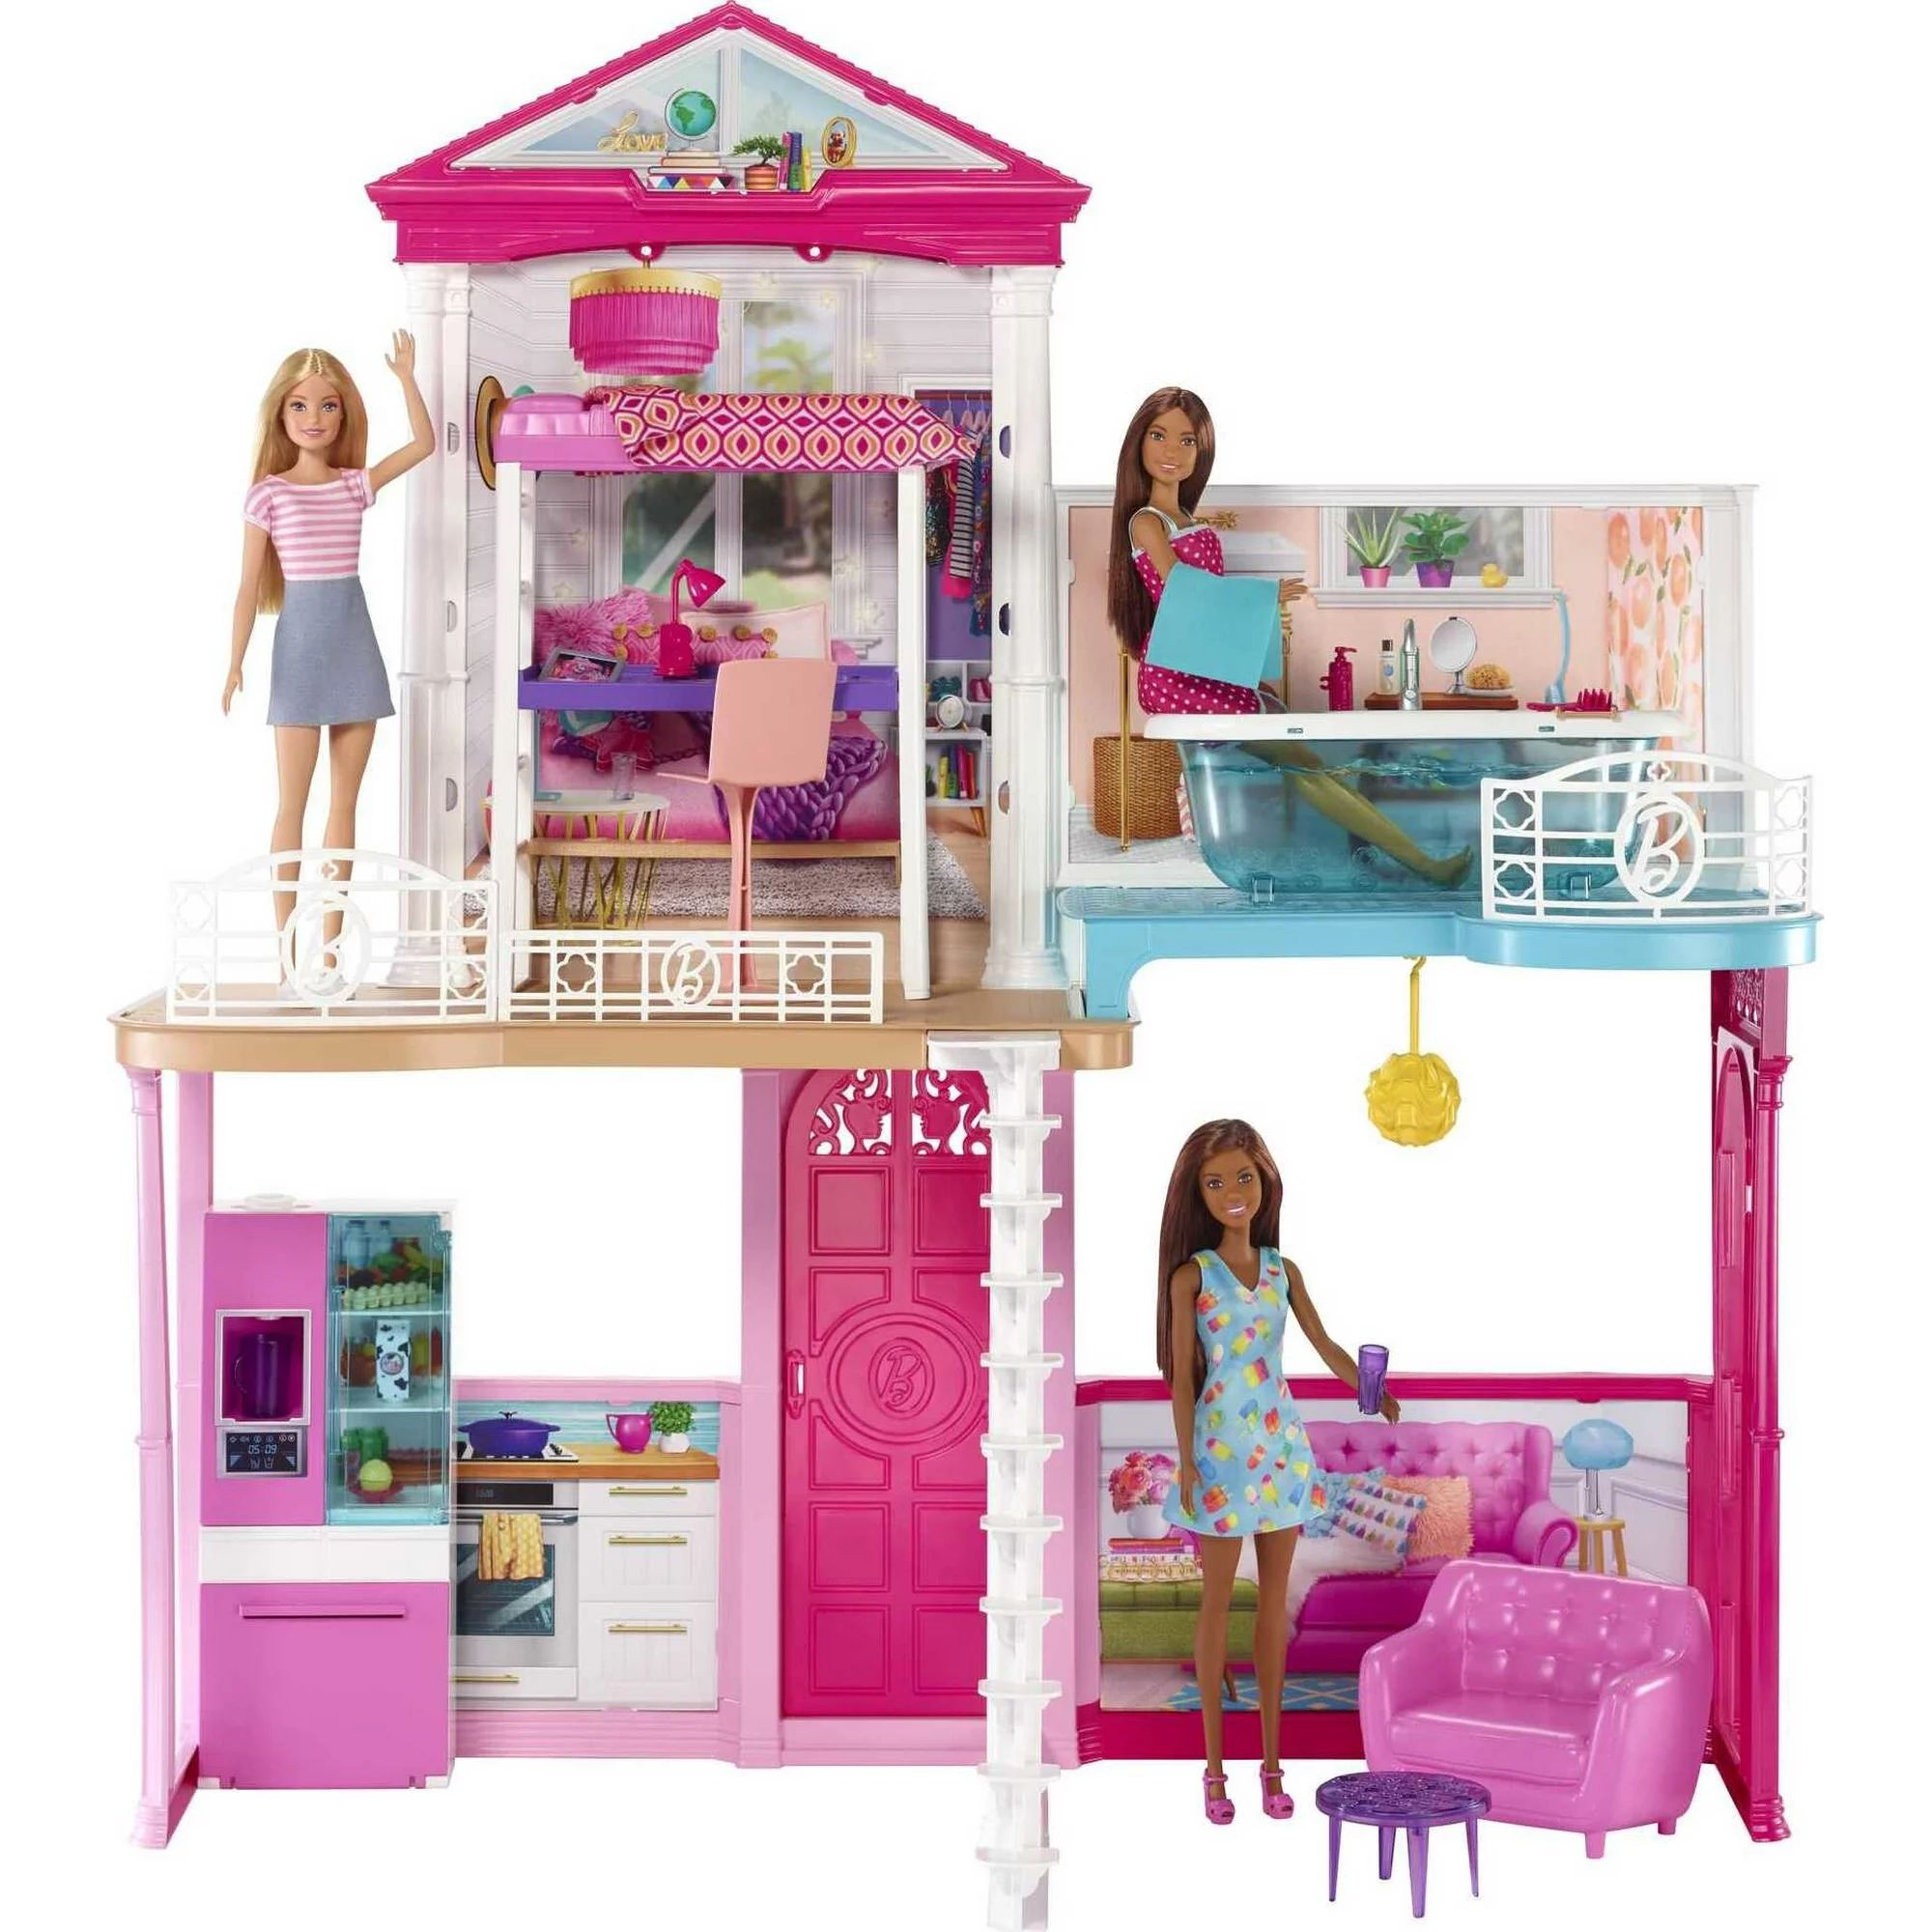 Barbie Dollhouse Set with 3 Dolls and Furniture, Pool and Accessories | Walmart (US)